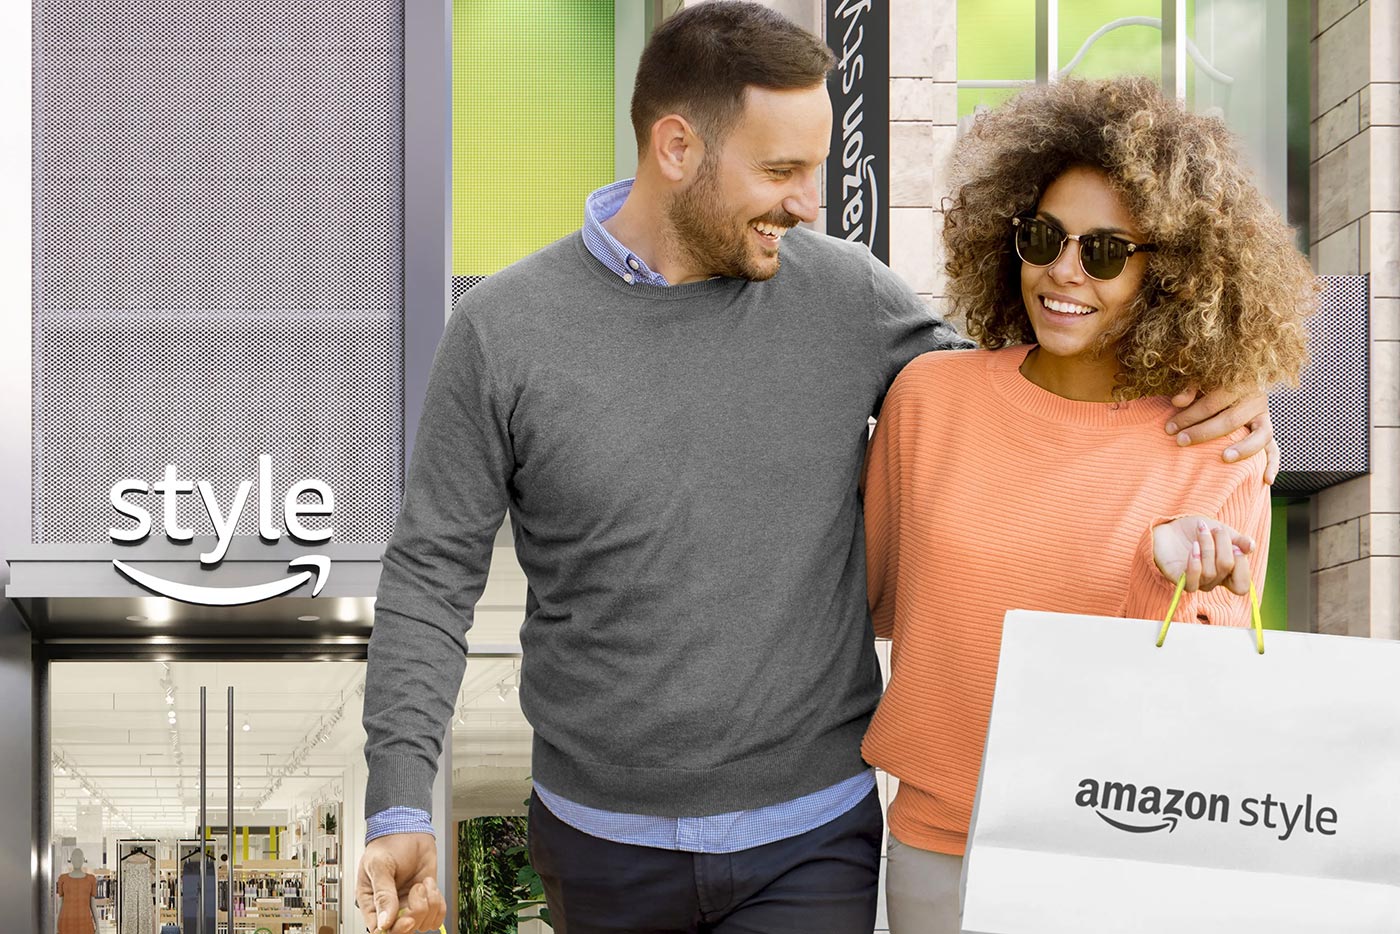 Amazon Fashion - Amazon's Rise In The Fashion Industry